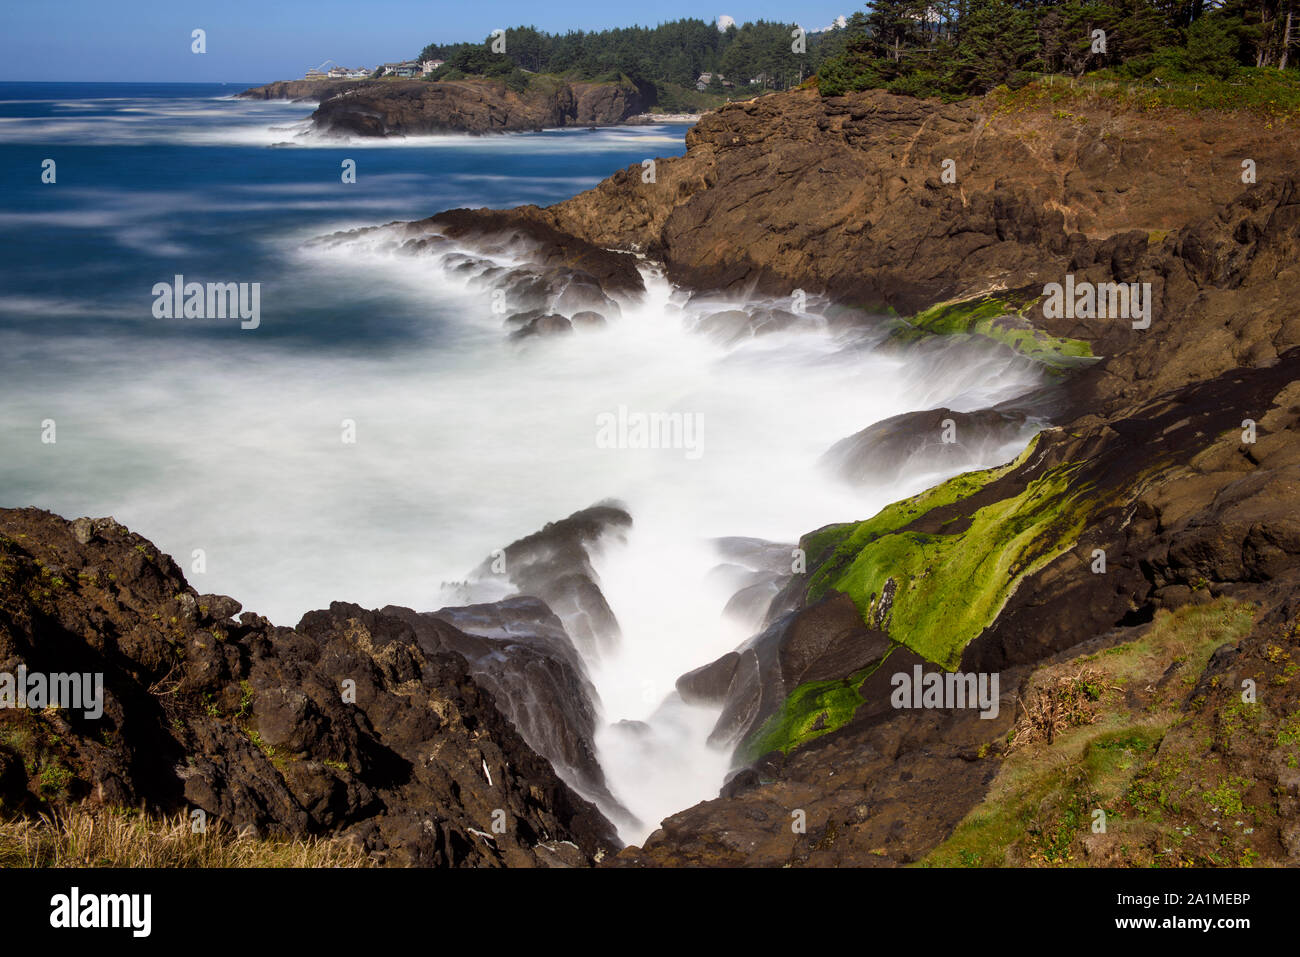 Rugged coastline with pounding surf, Rocky Creek State Scenic Viewpoint, Oregon, USA Stock Photo